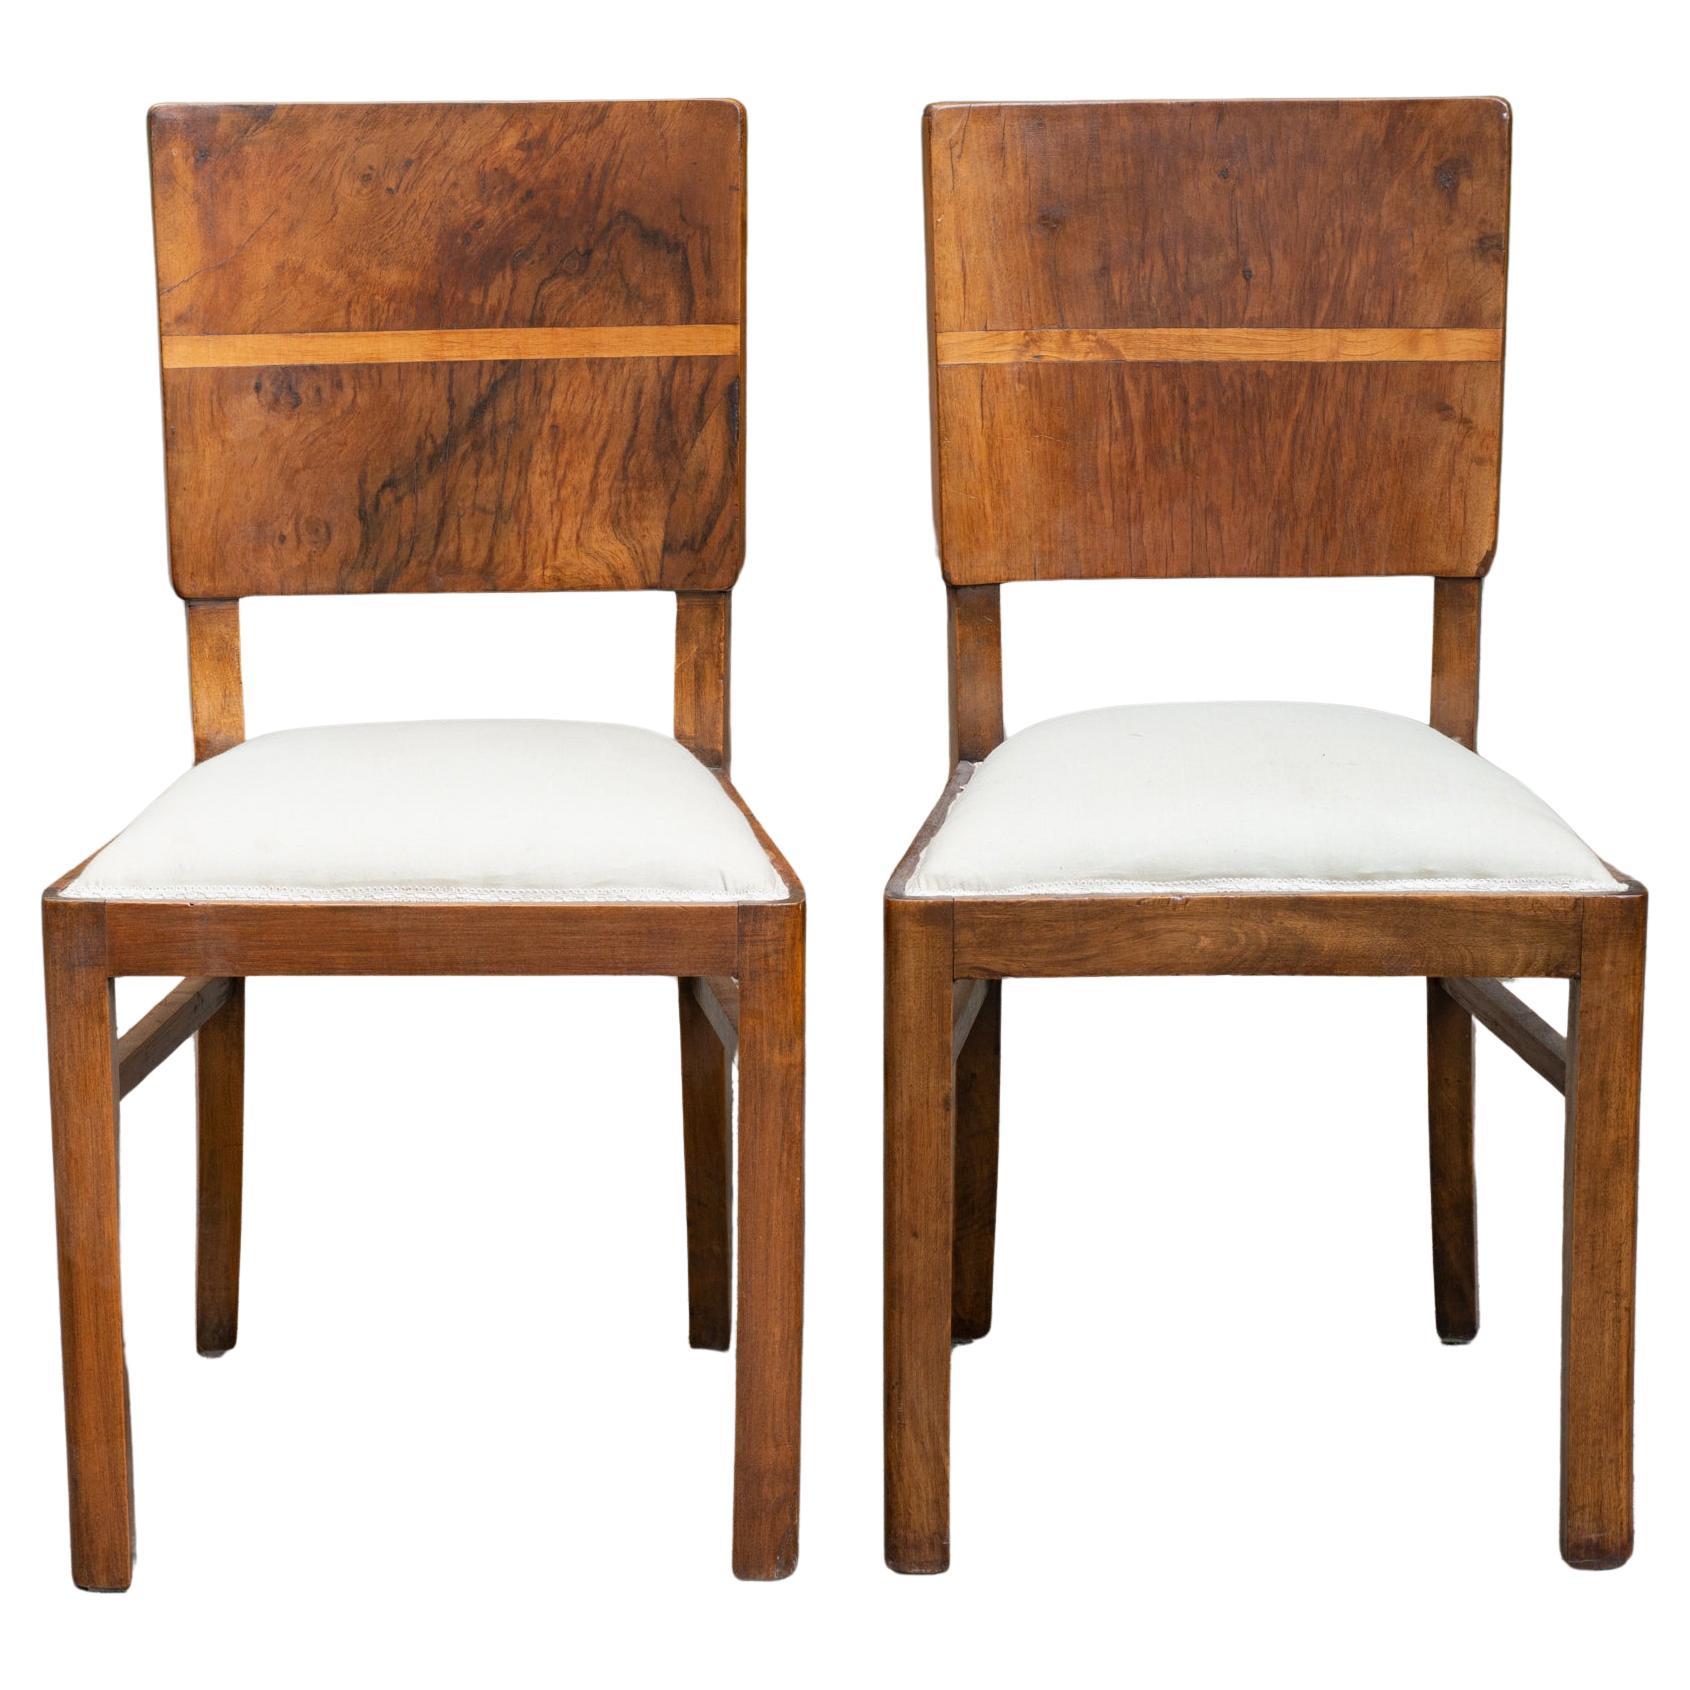 Pair of Art Déco Chairs